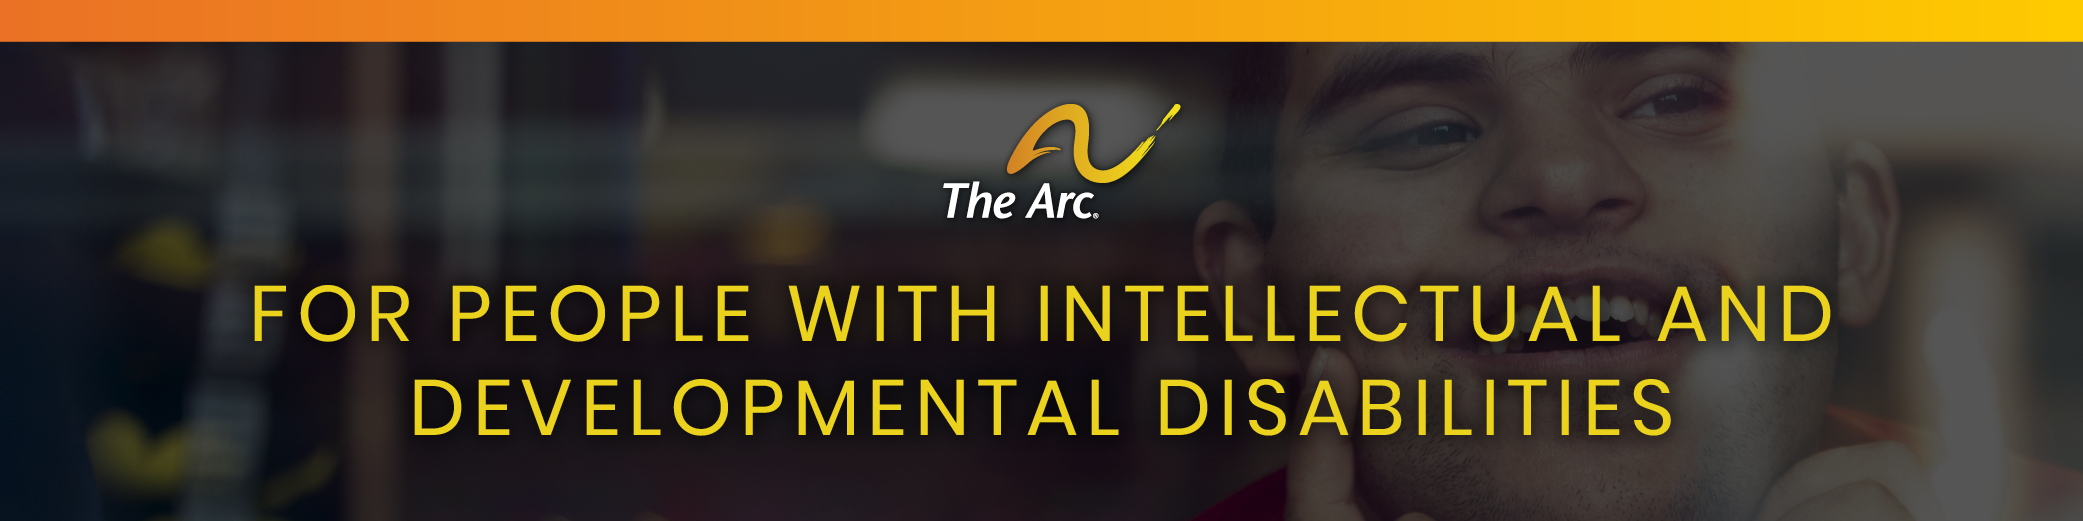 For people with intellectual and developmental disabilities